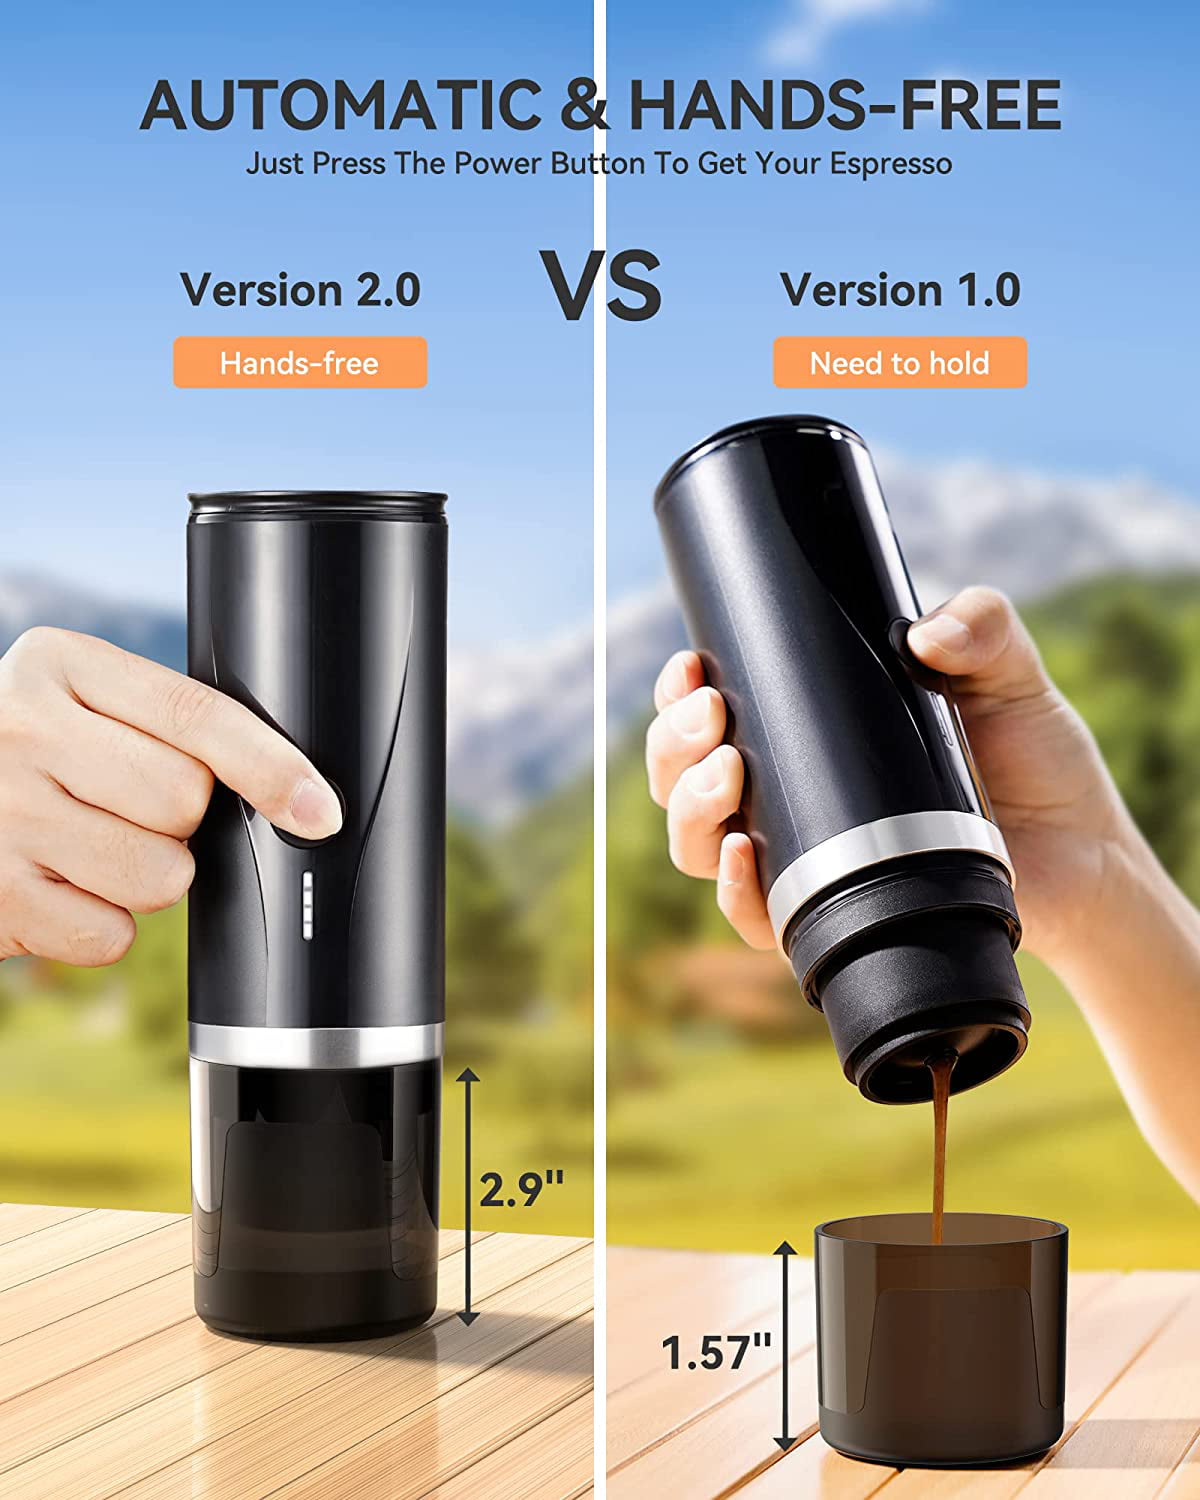 RECAFIMIL Portable Coffee Maker: 12V Travel Espresso Machine 12W, 9 Bar  Pressure 2400mAh Rechargeable Battery Heating Water for Camping, Driving,  Home